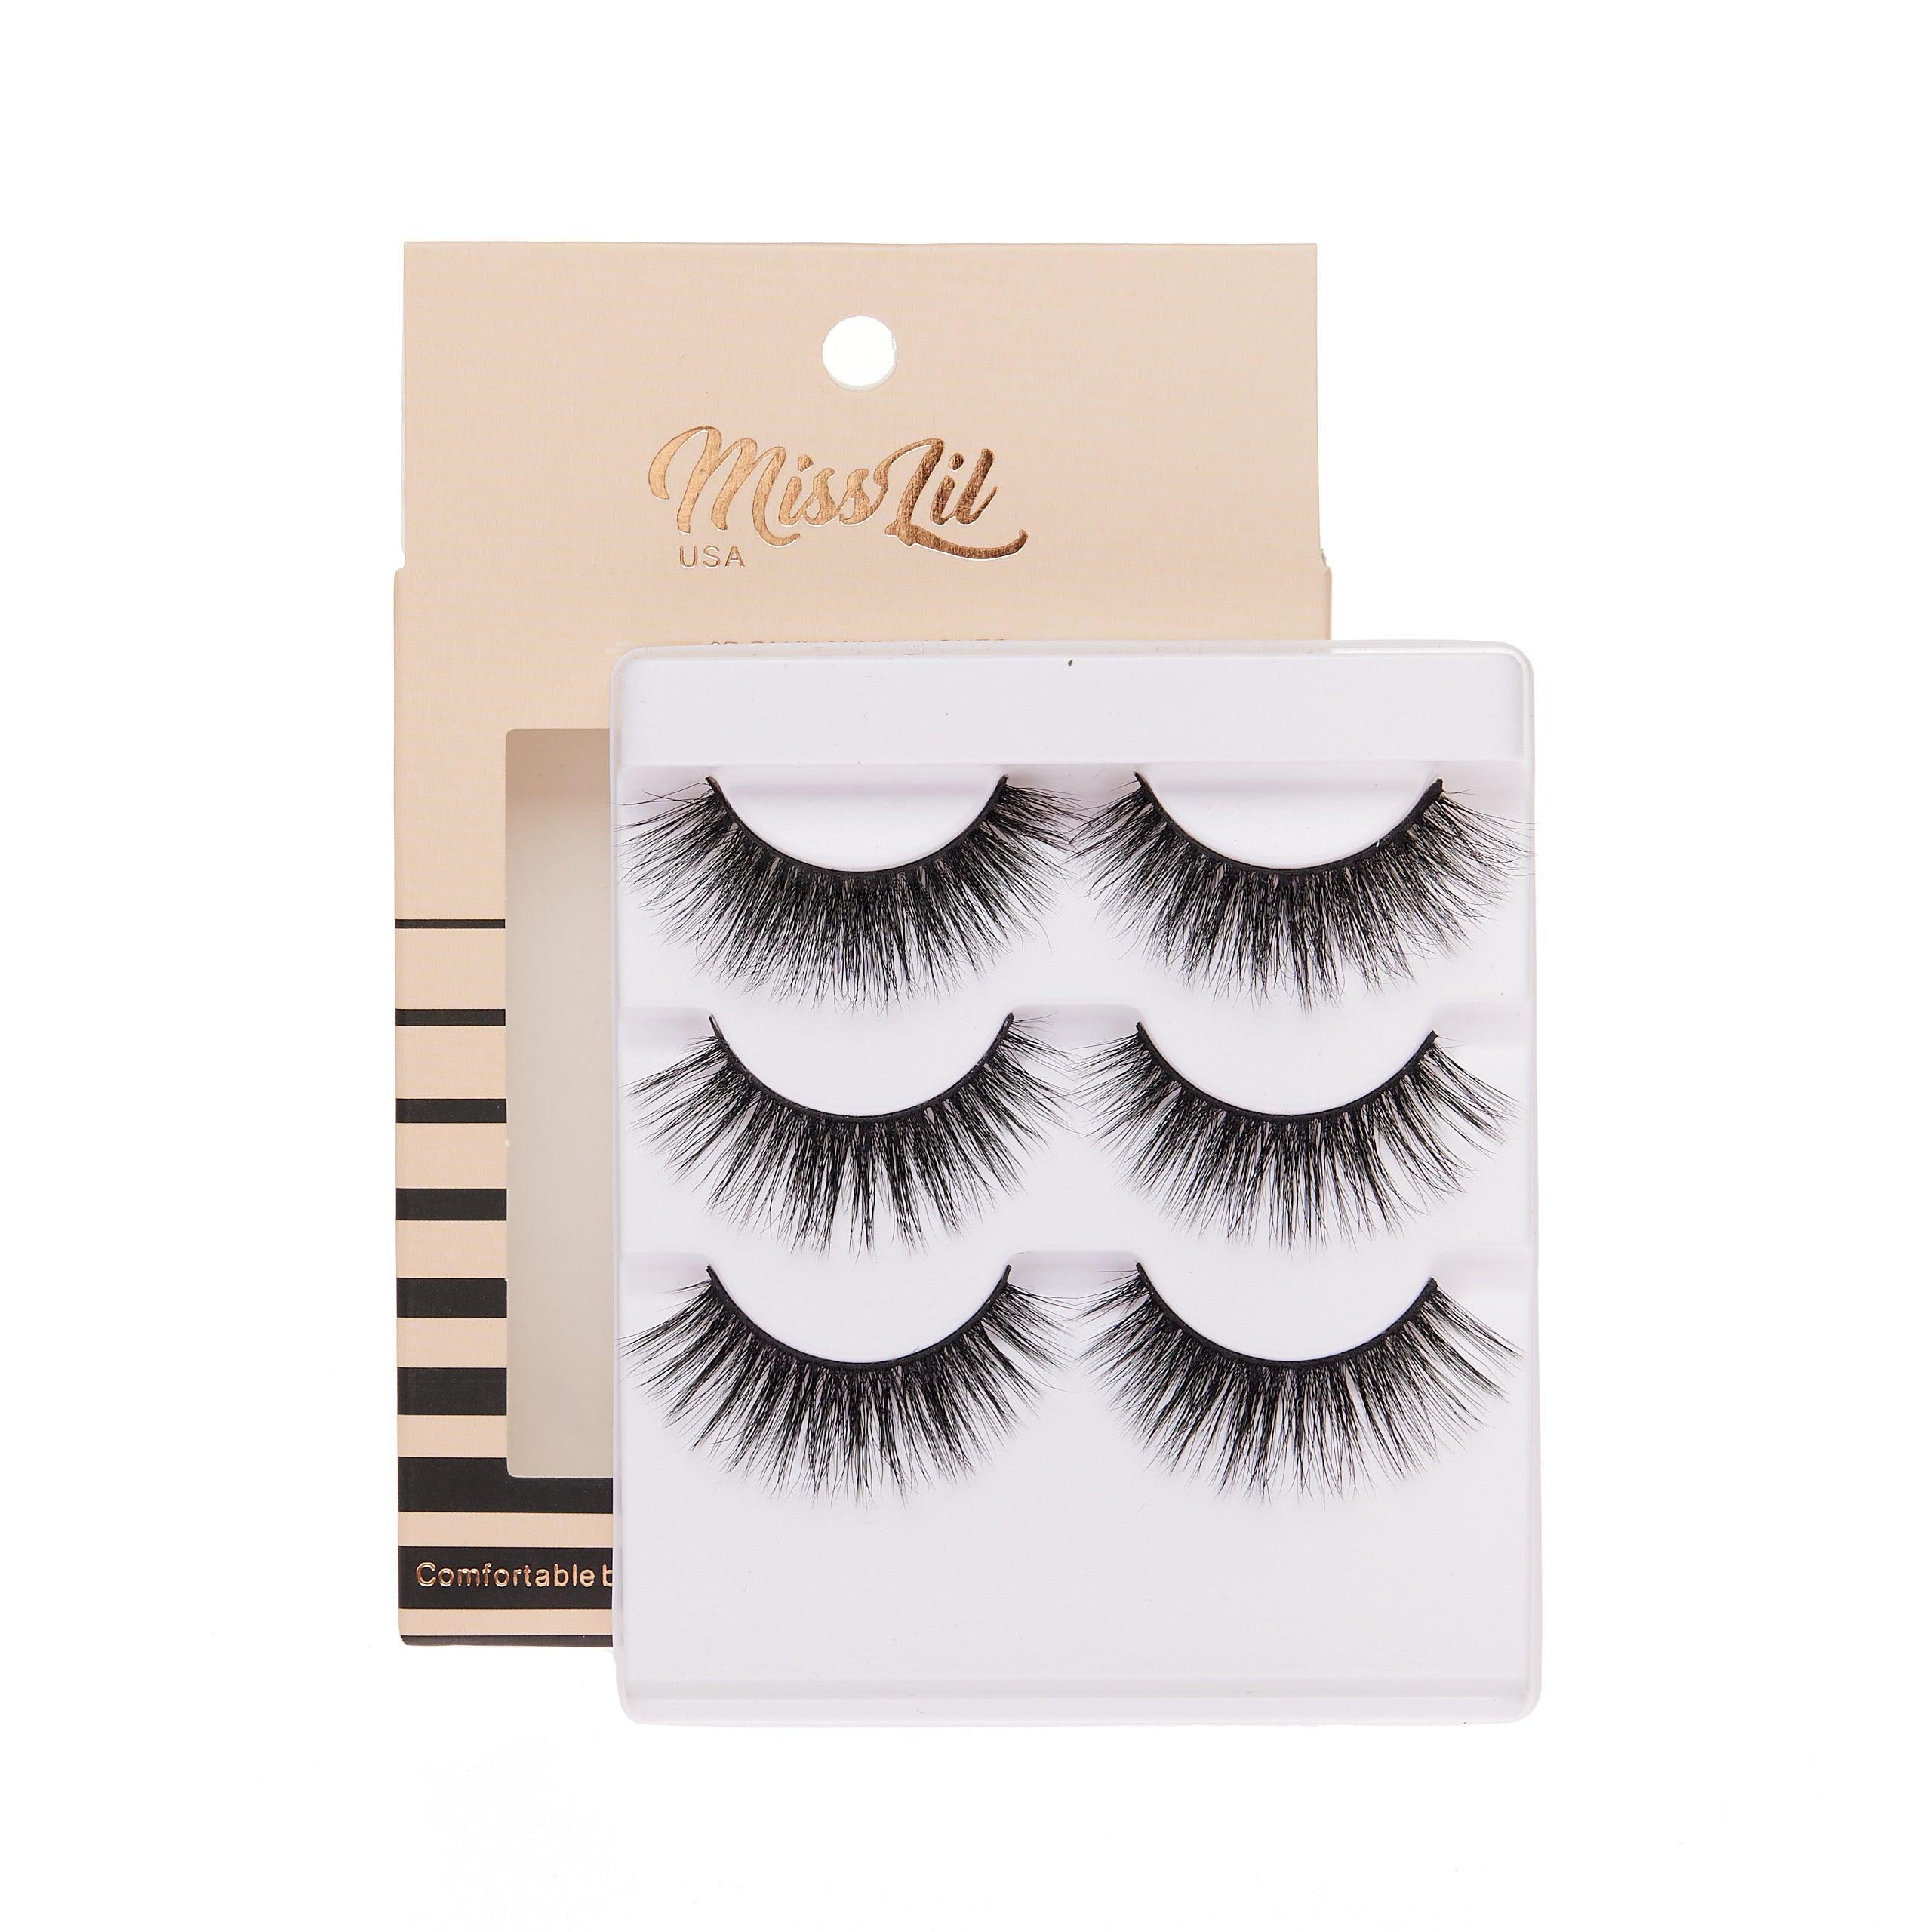 3-Pair Faux 9D Mink Eyelashes - Luxury Collection #28 - Pack of 3 - Miss Lil USA